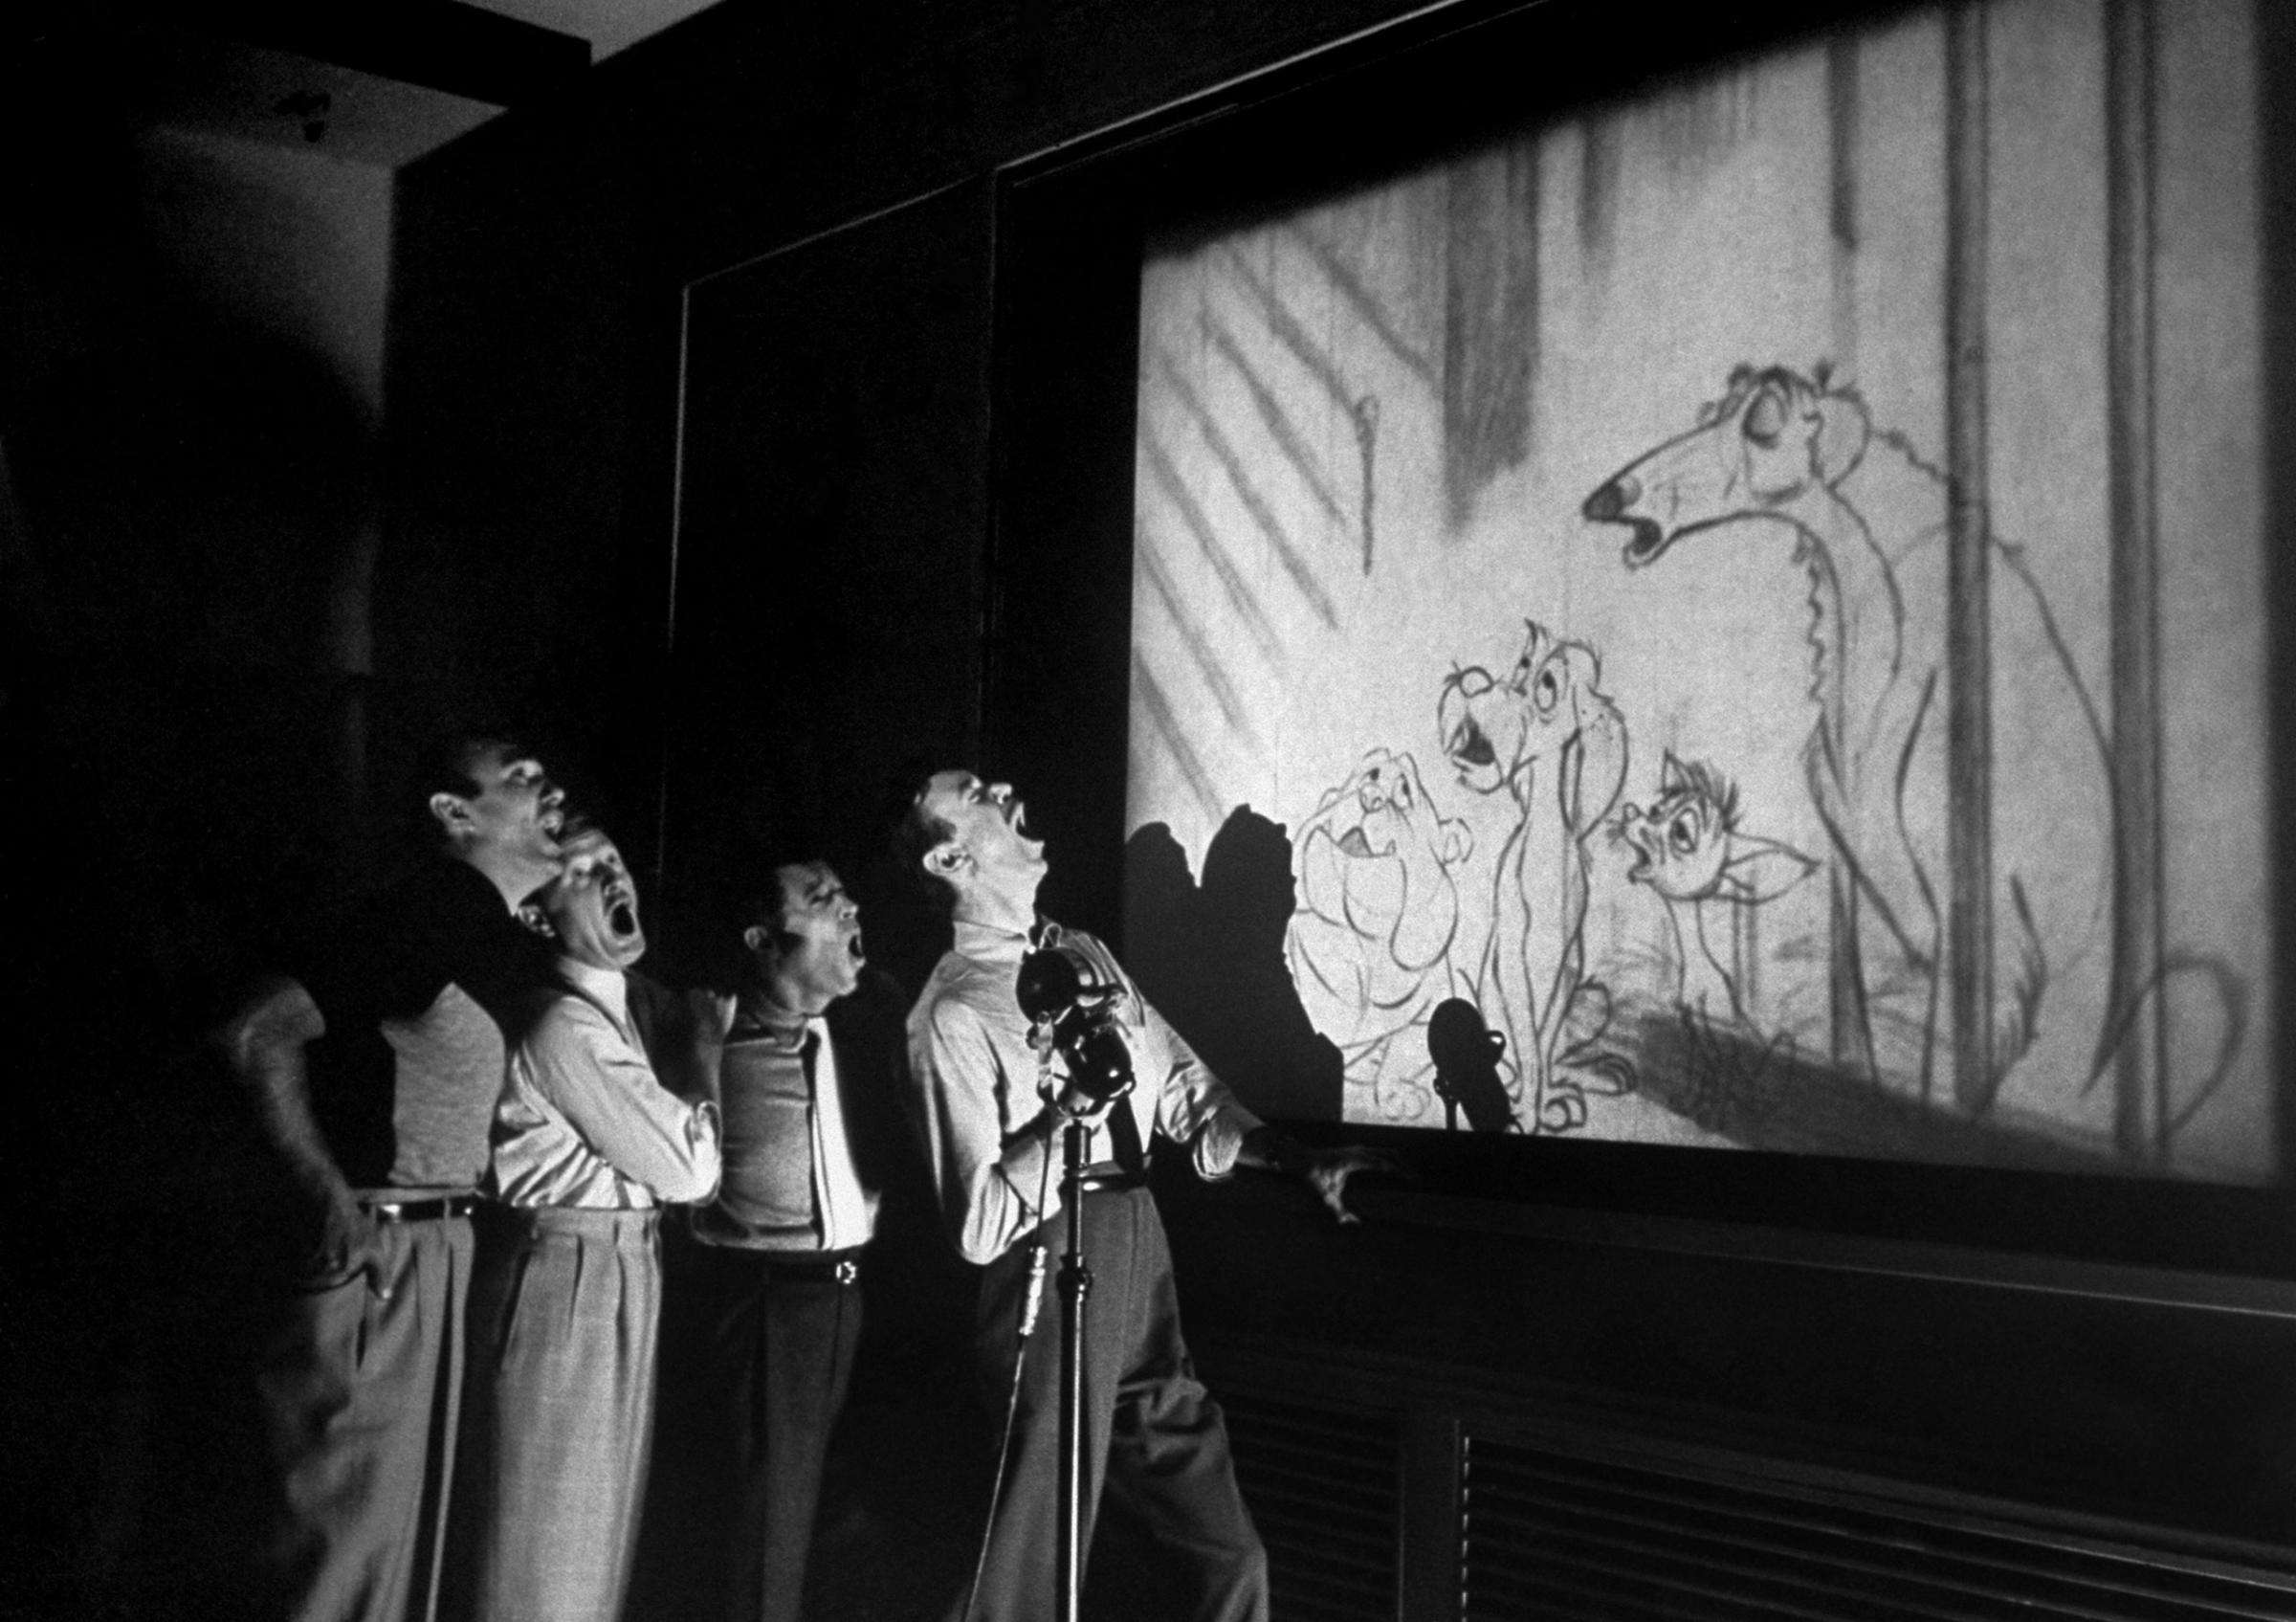 Quartet known as The Mello-Men bays in harmony before screen showing four canine characters whose voices they represent in the forthcoming Disney feature cartoon, The Lady and The Tramp.